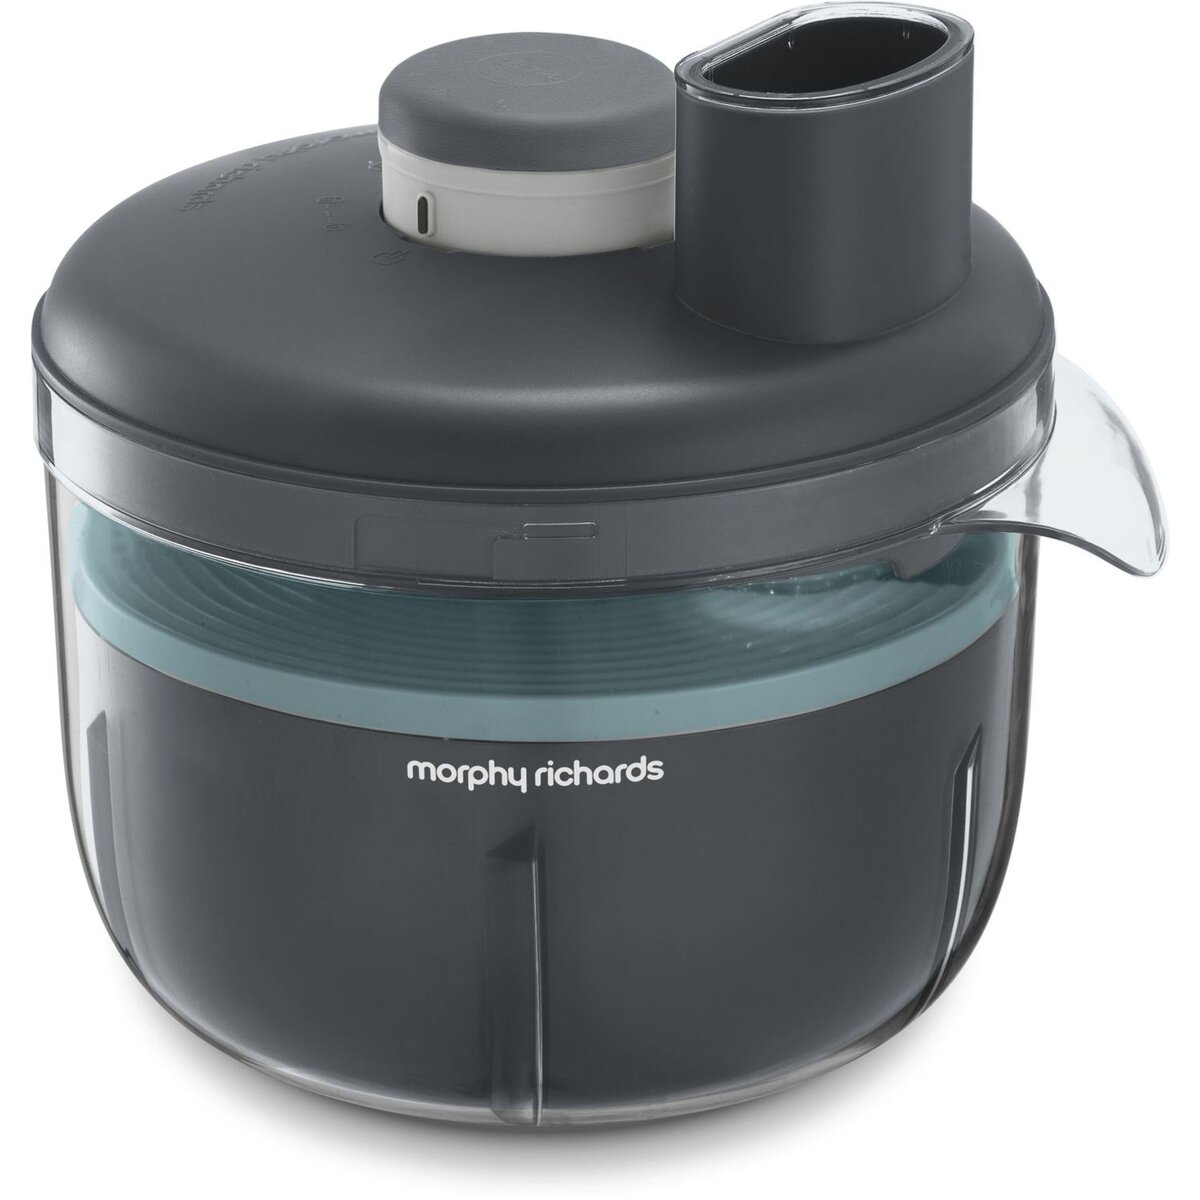 MORPHY RICHARDS Robot multifonction Compact Prepstar M401014EE - Gris